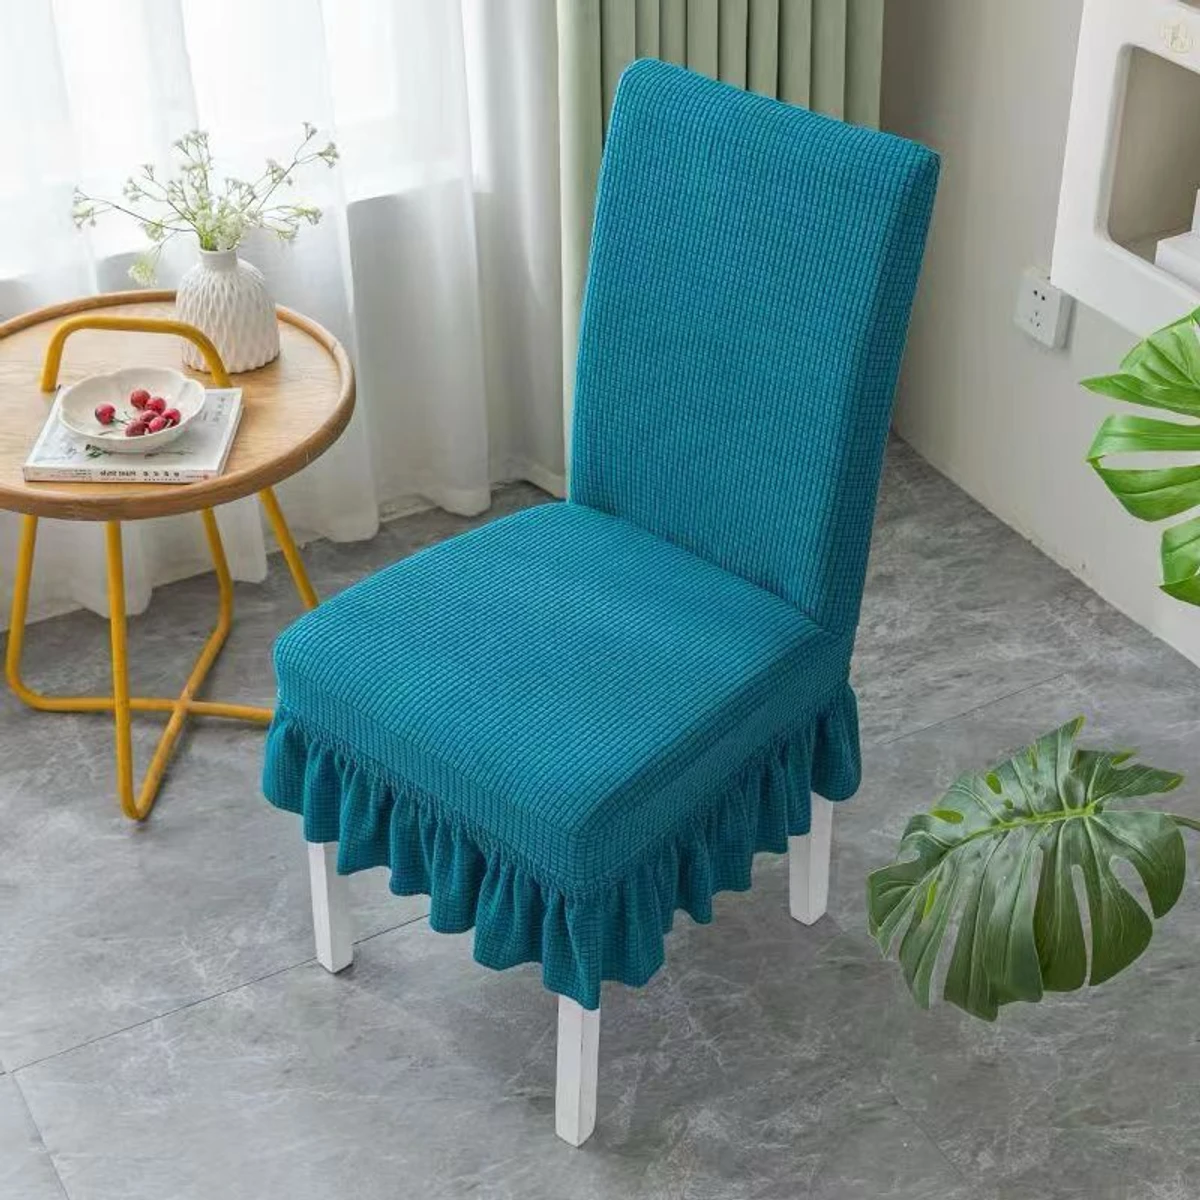 Solid Color Chair Covers Decoration Chair Cover for Dining Room Seat (sky blue)